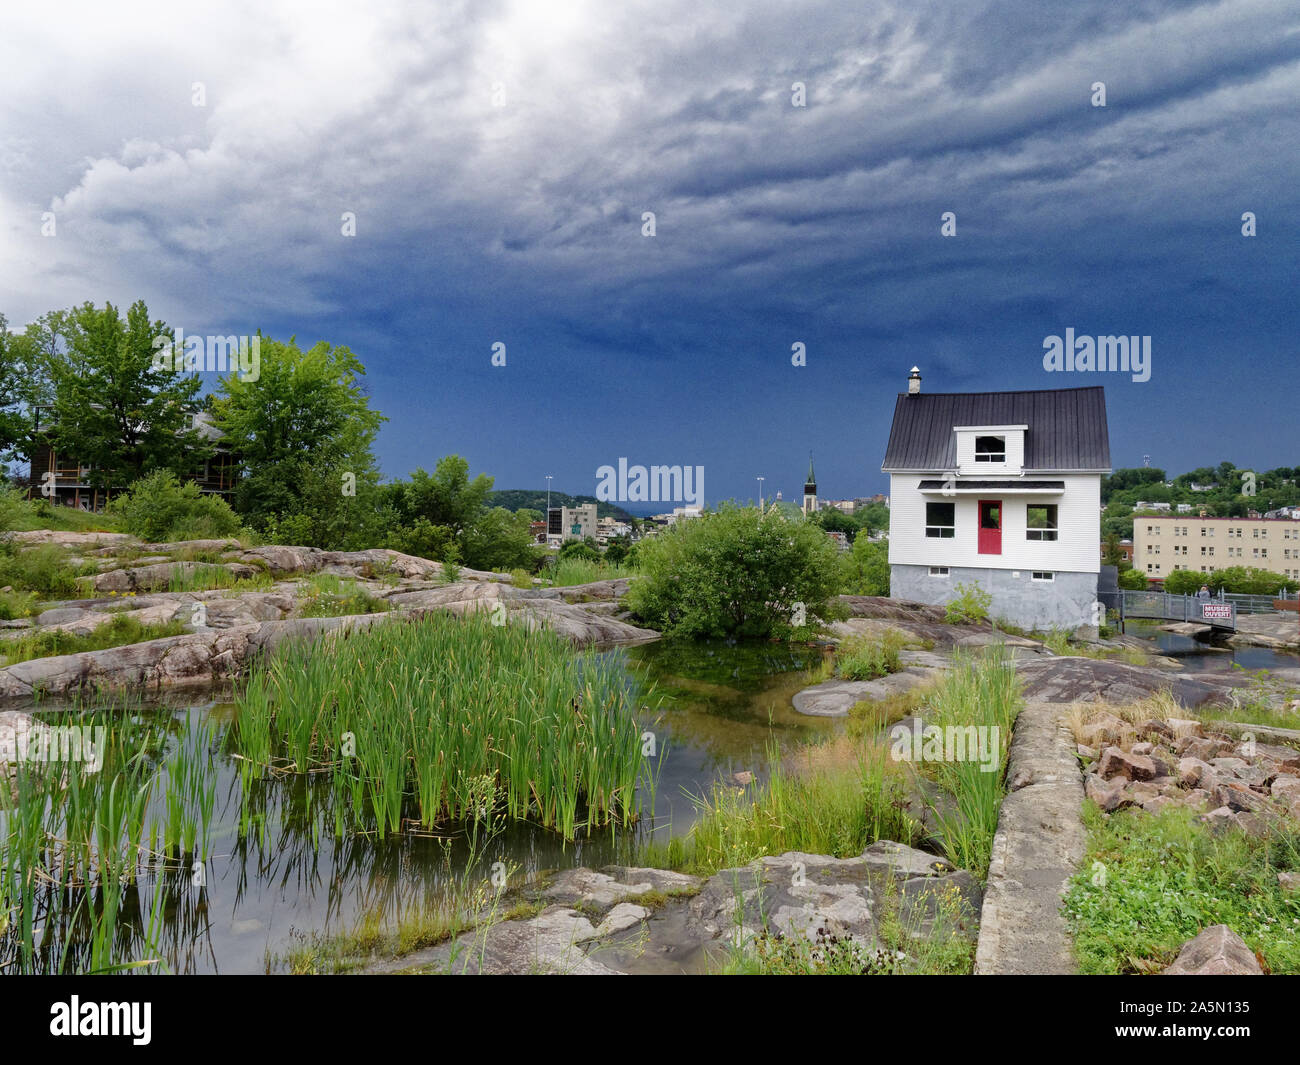 The famous little white house (La Petite Maison Blanche) in Saguenay that withstood the 1996 flooding, with stormy skies beyond Stock Photo